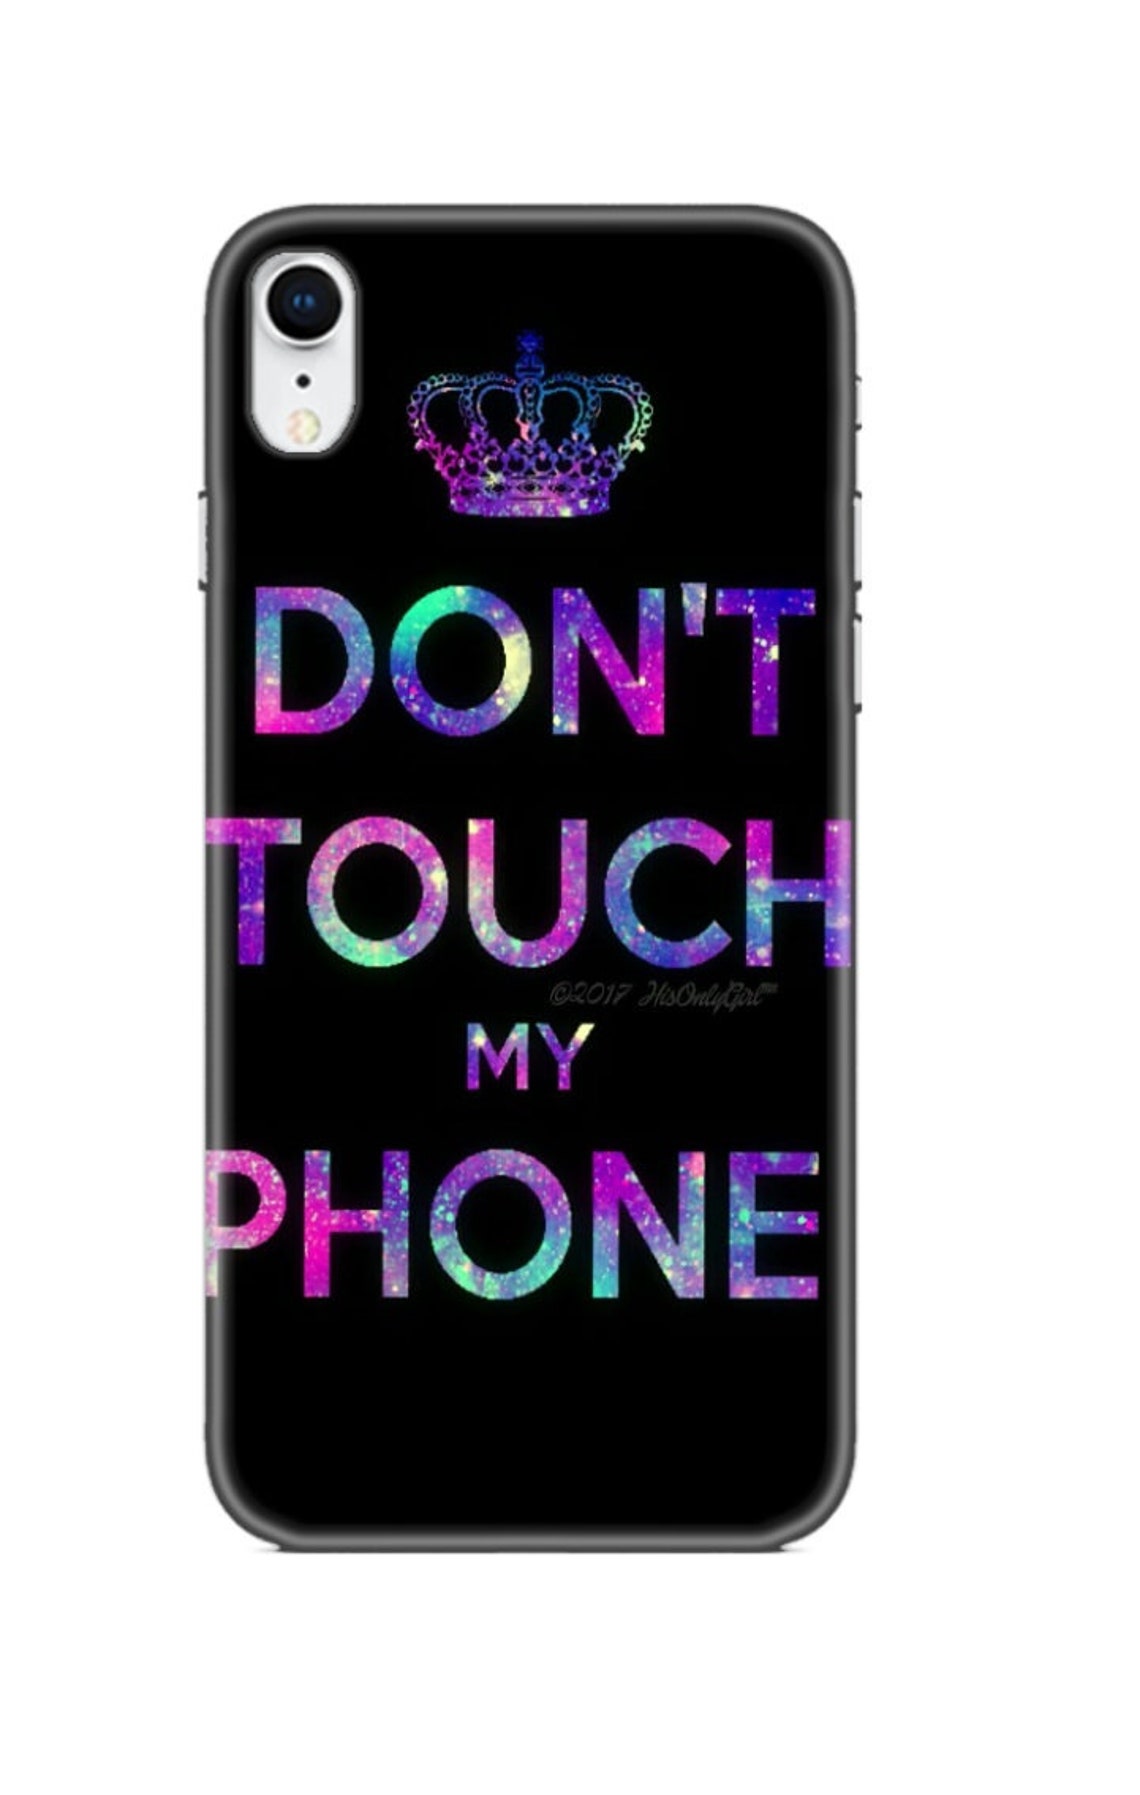 Don't touch my phone personalised case Name Text with | Etsy